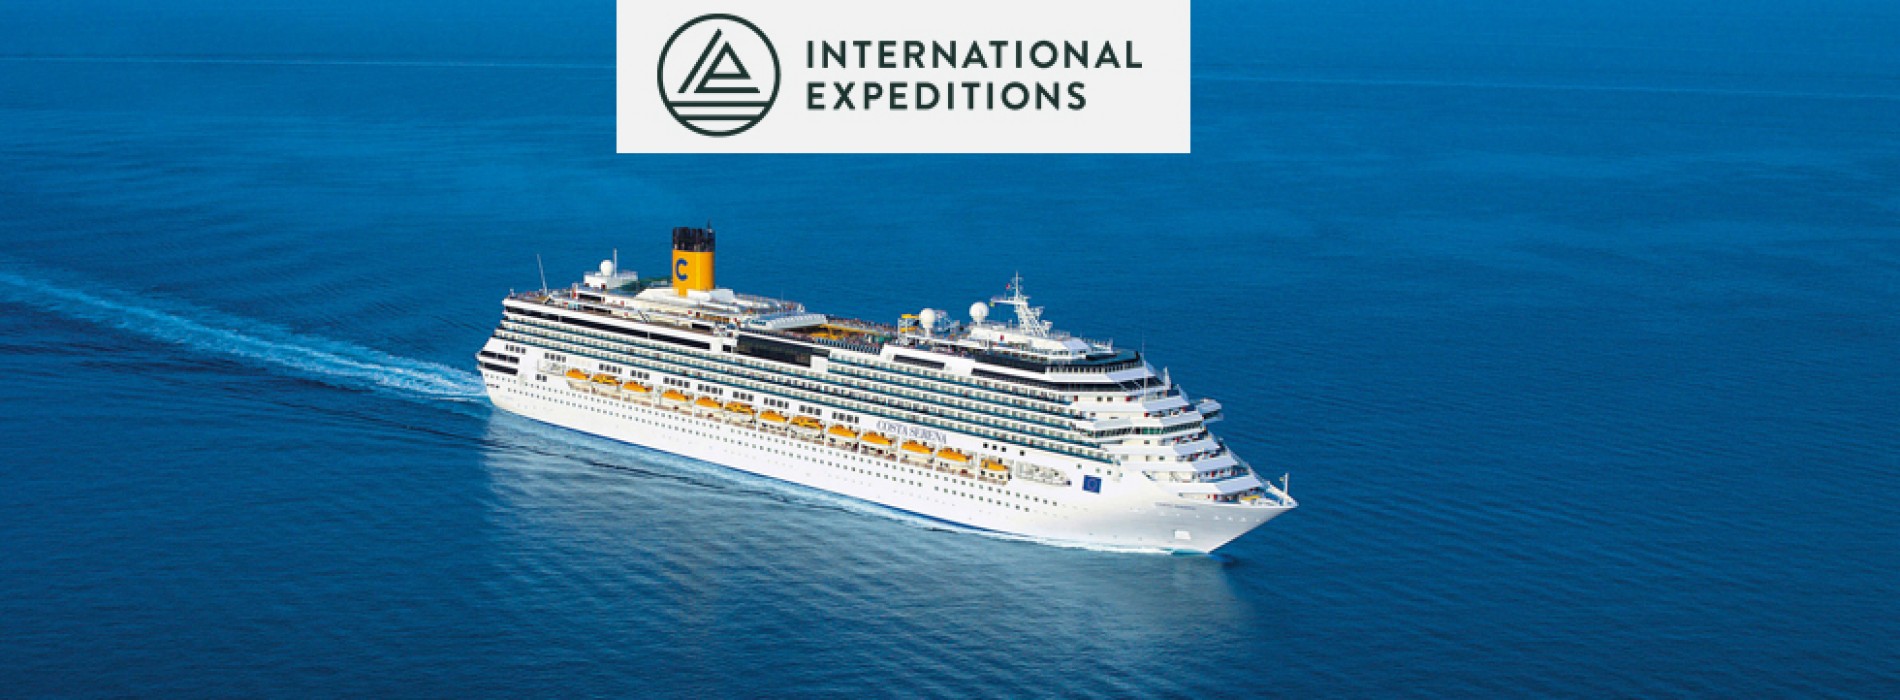 International Expeditions offers India cruise-tour